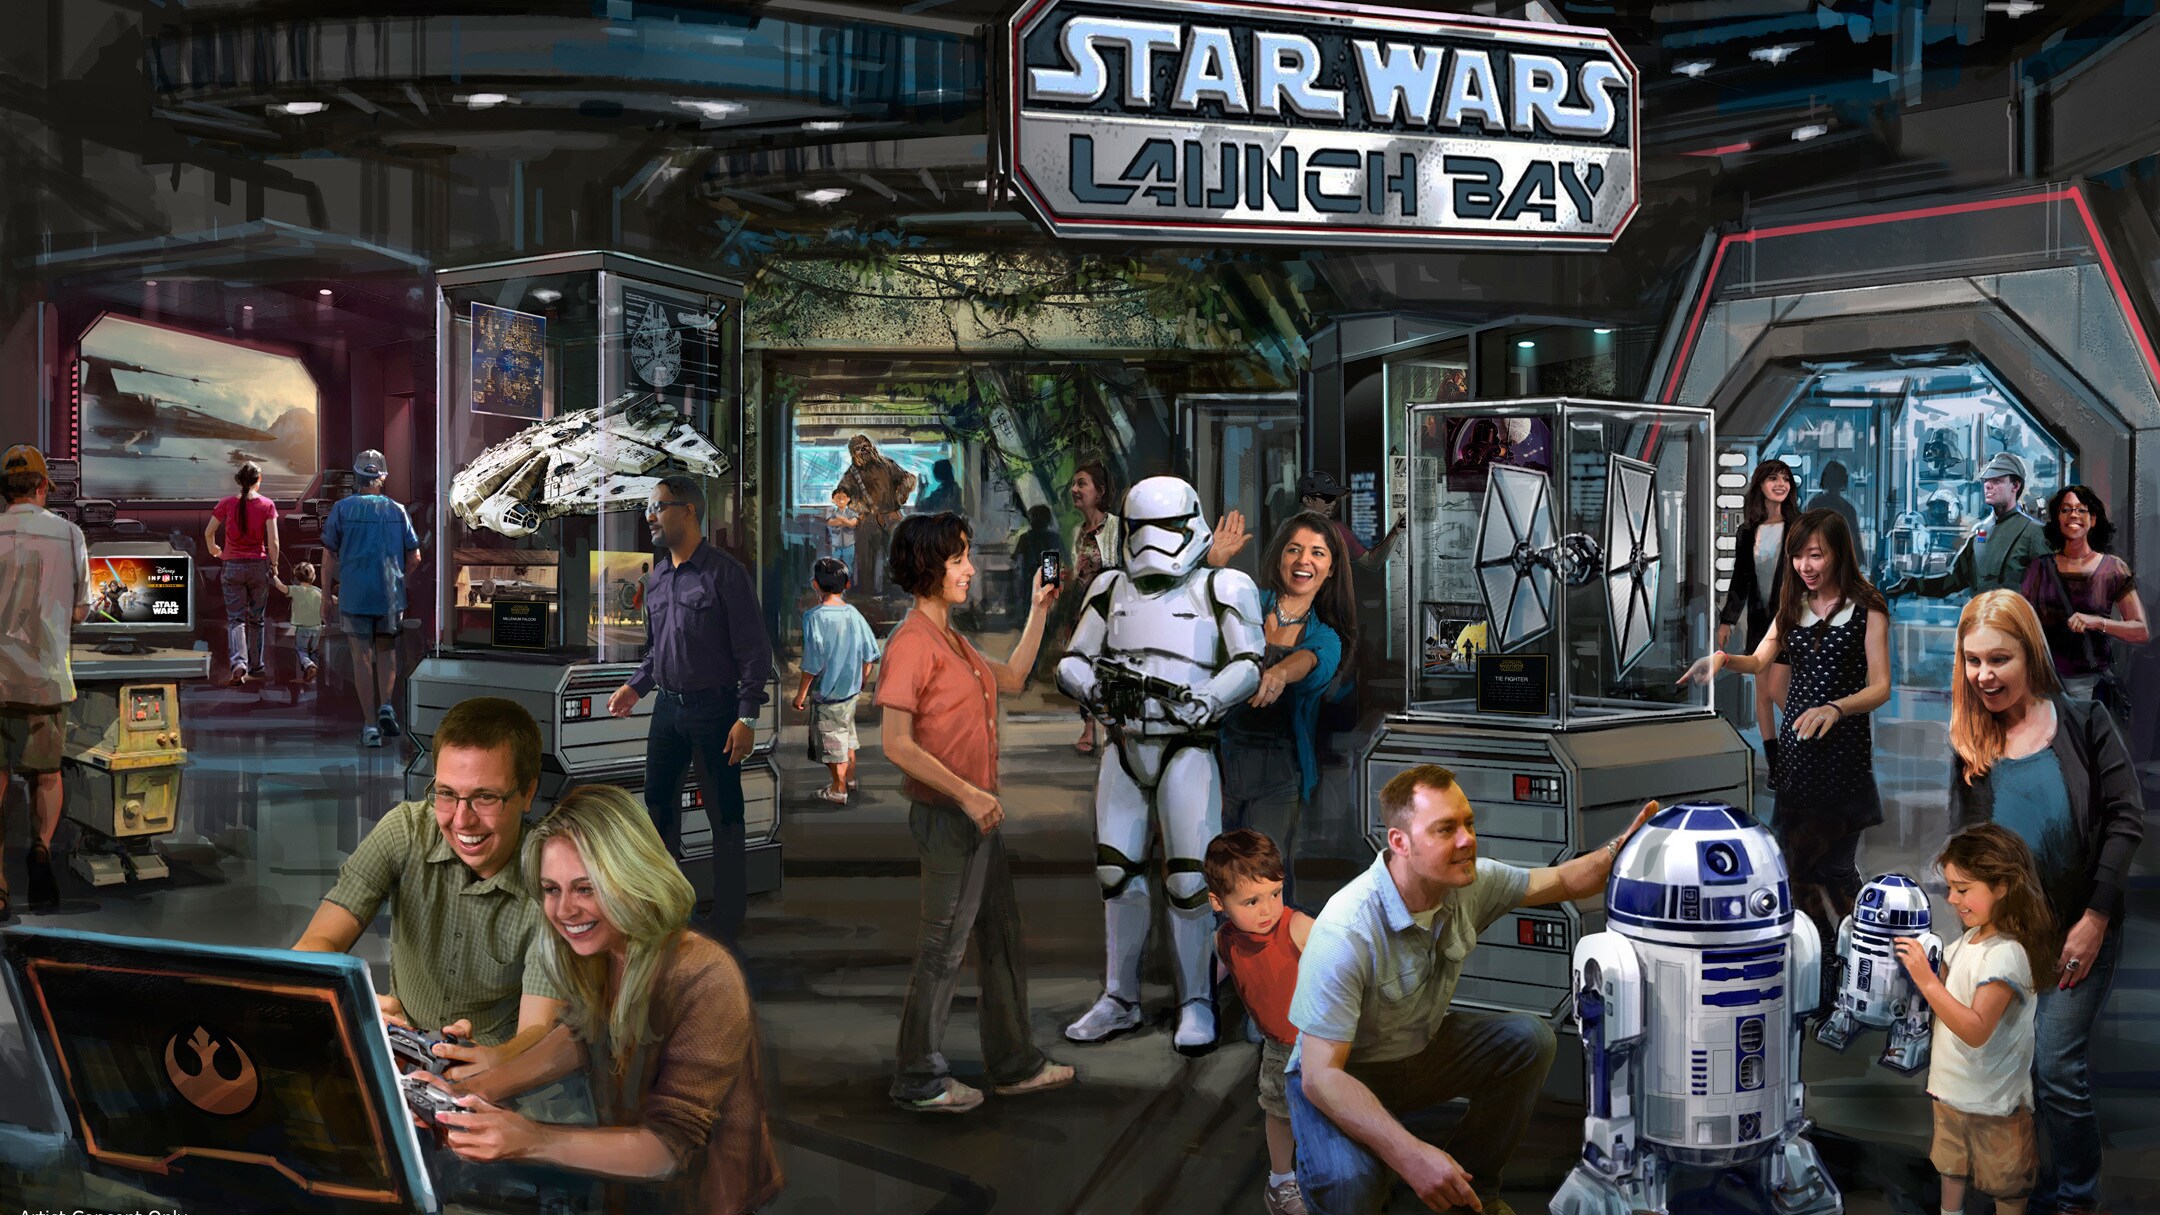 New and Enhanced Star Wars Experiences Coming to Disney Parks